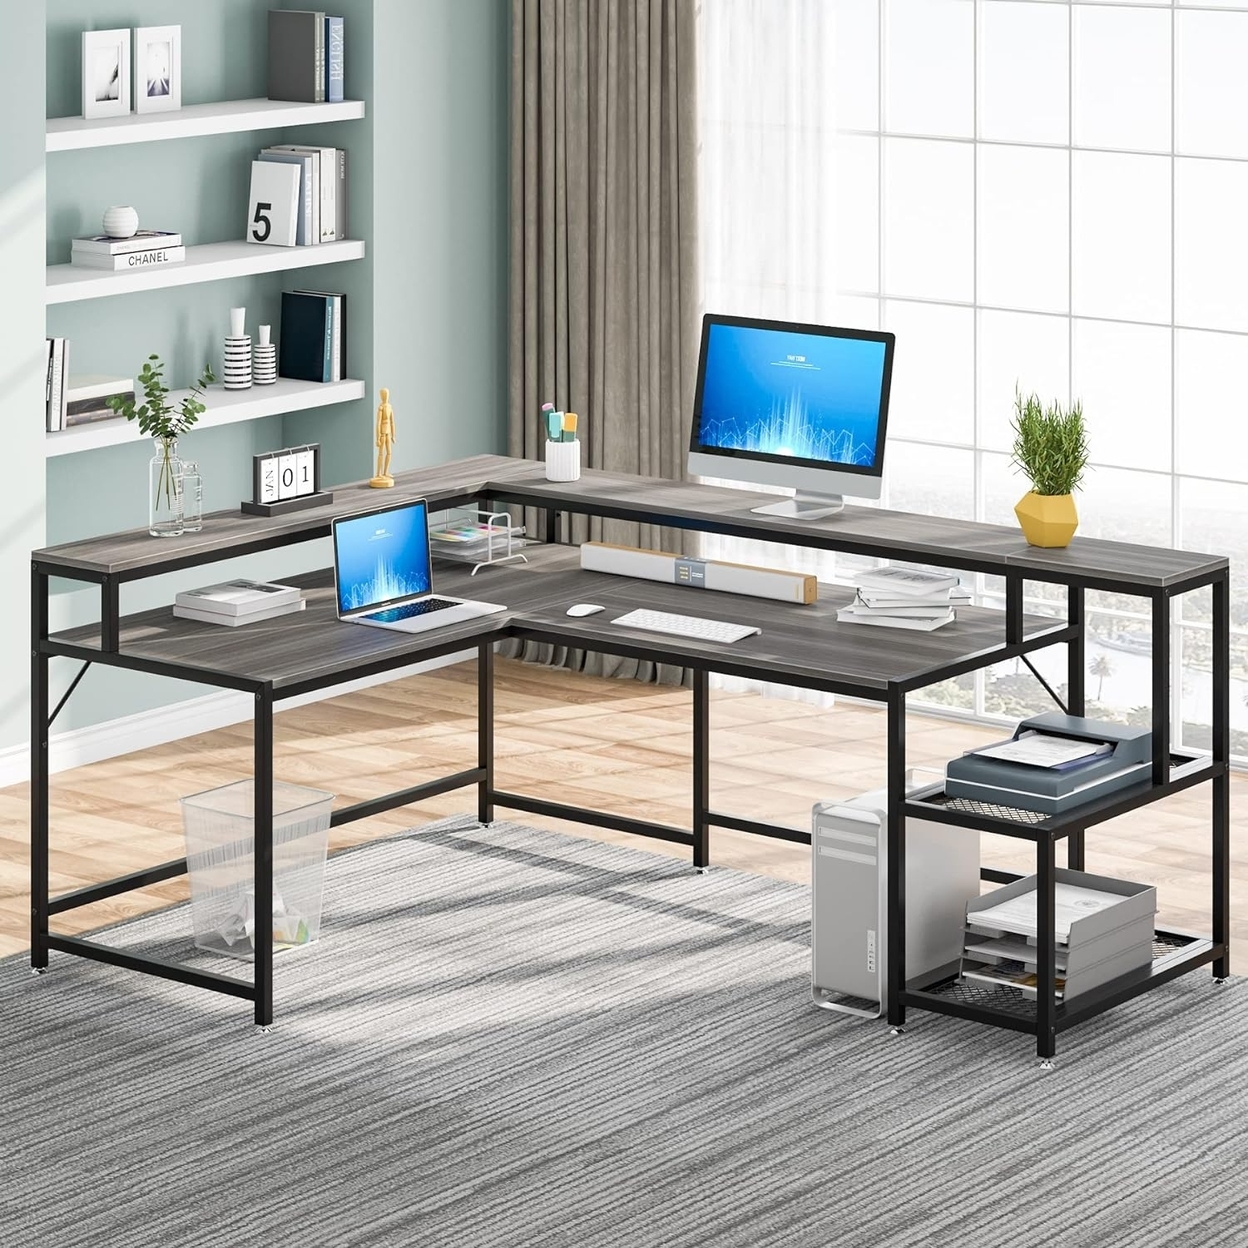 69 L Shaped Computer Desk With Monitor Stand, Large Reversible Corner Desk With Storage Shelf